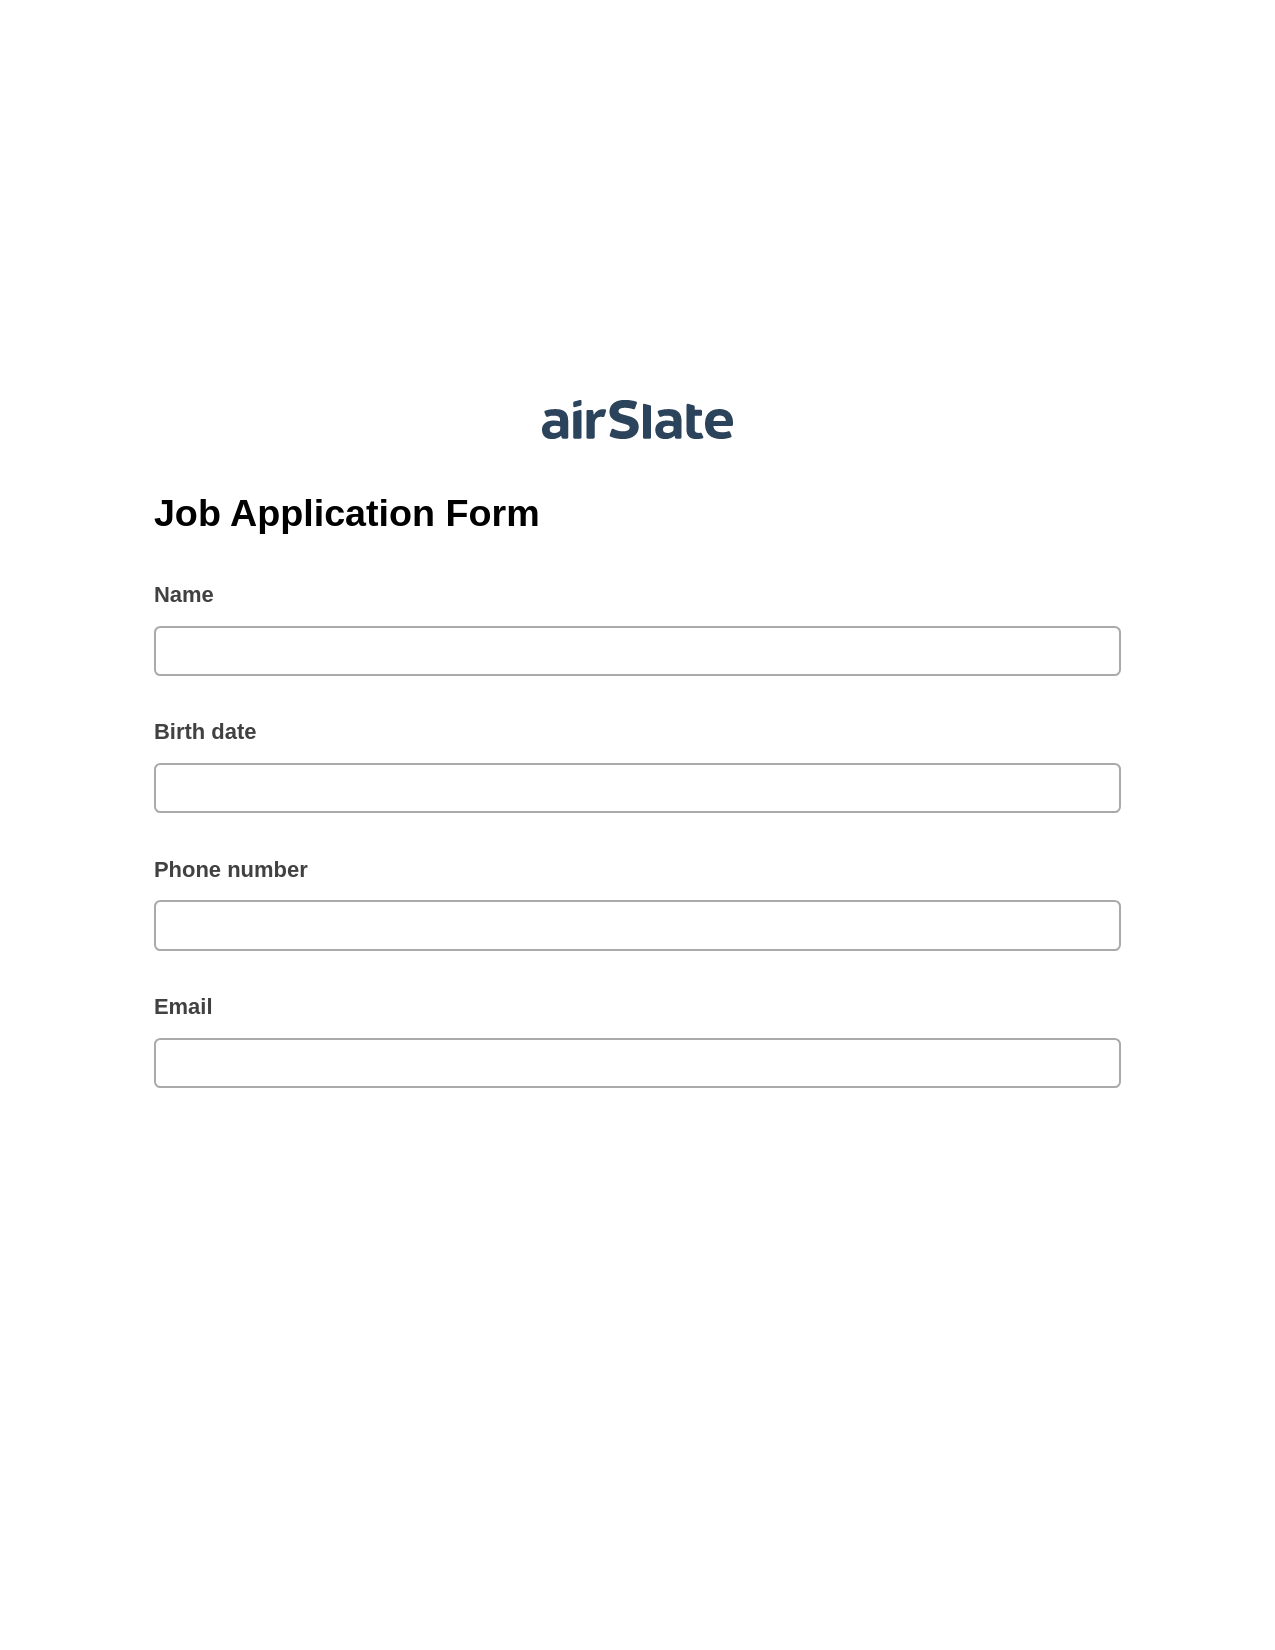 Job Application Form Pre-fill from Litmos bot, Update MS Dynamics 365 Record Bot, Text Message Notification Postfinish Bot